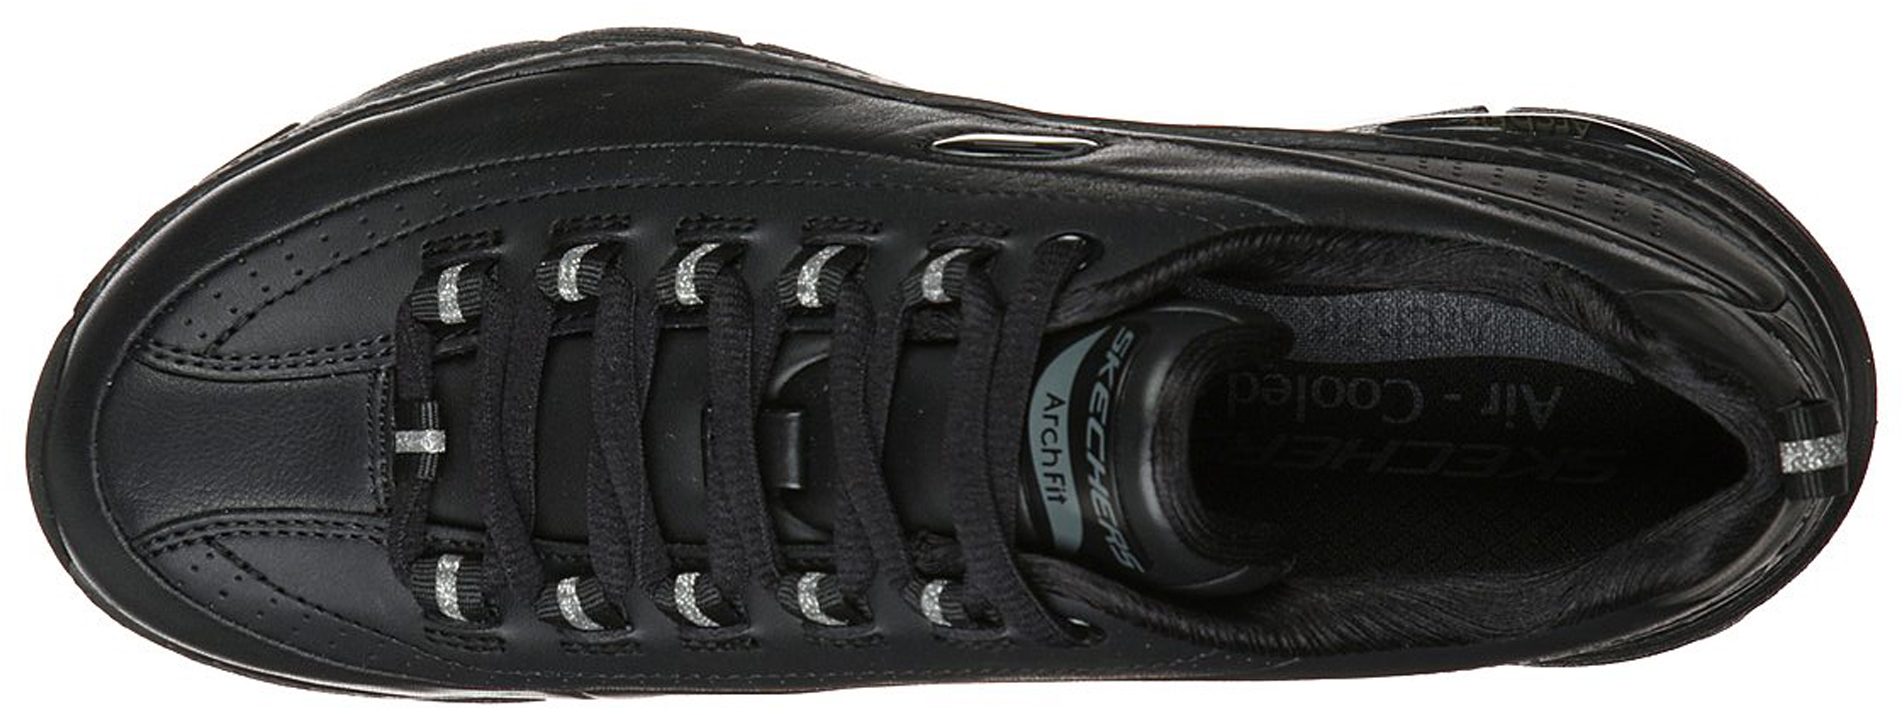 Skechers Arch Fit - Citi Drive Black 149146 BBK - Everyday Shoes ...